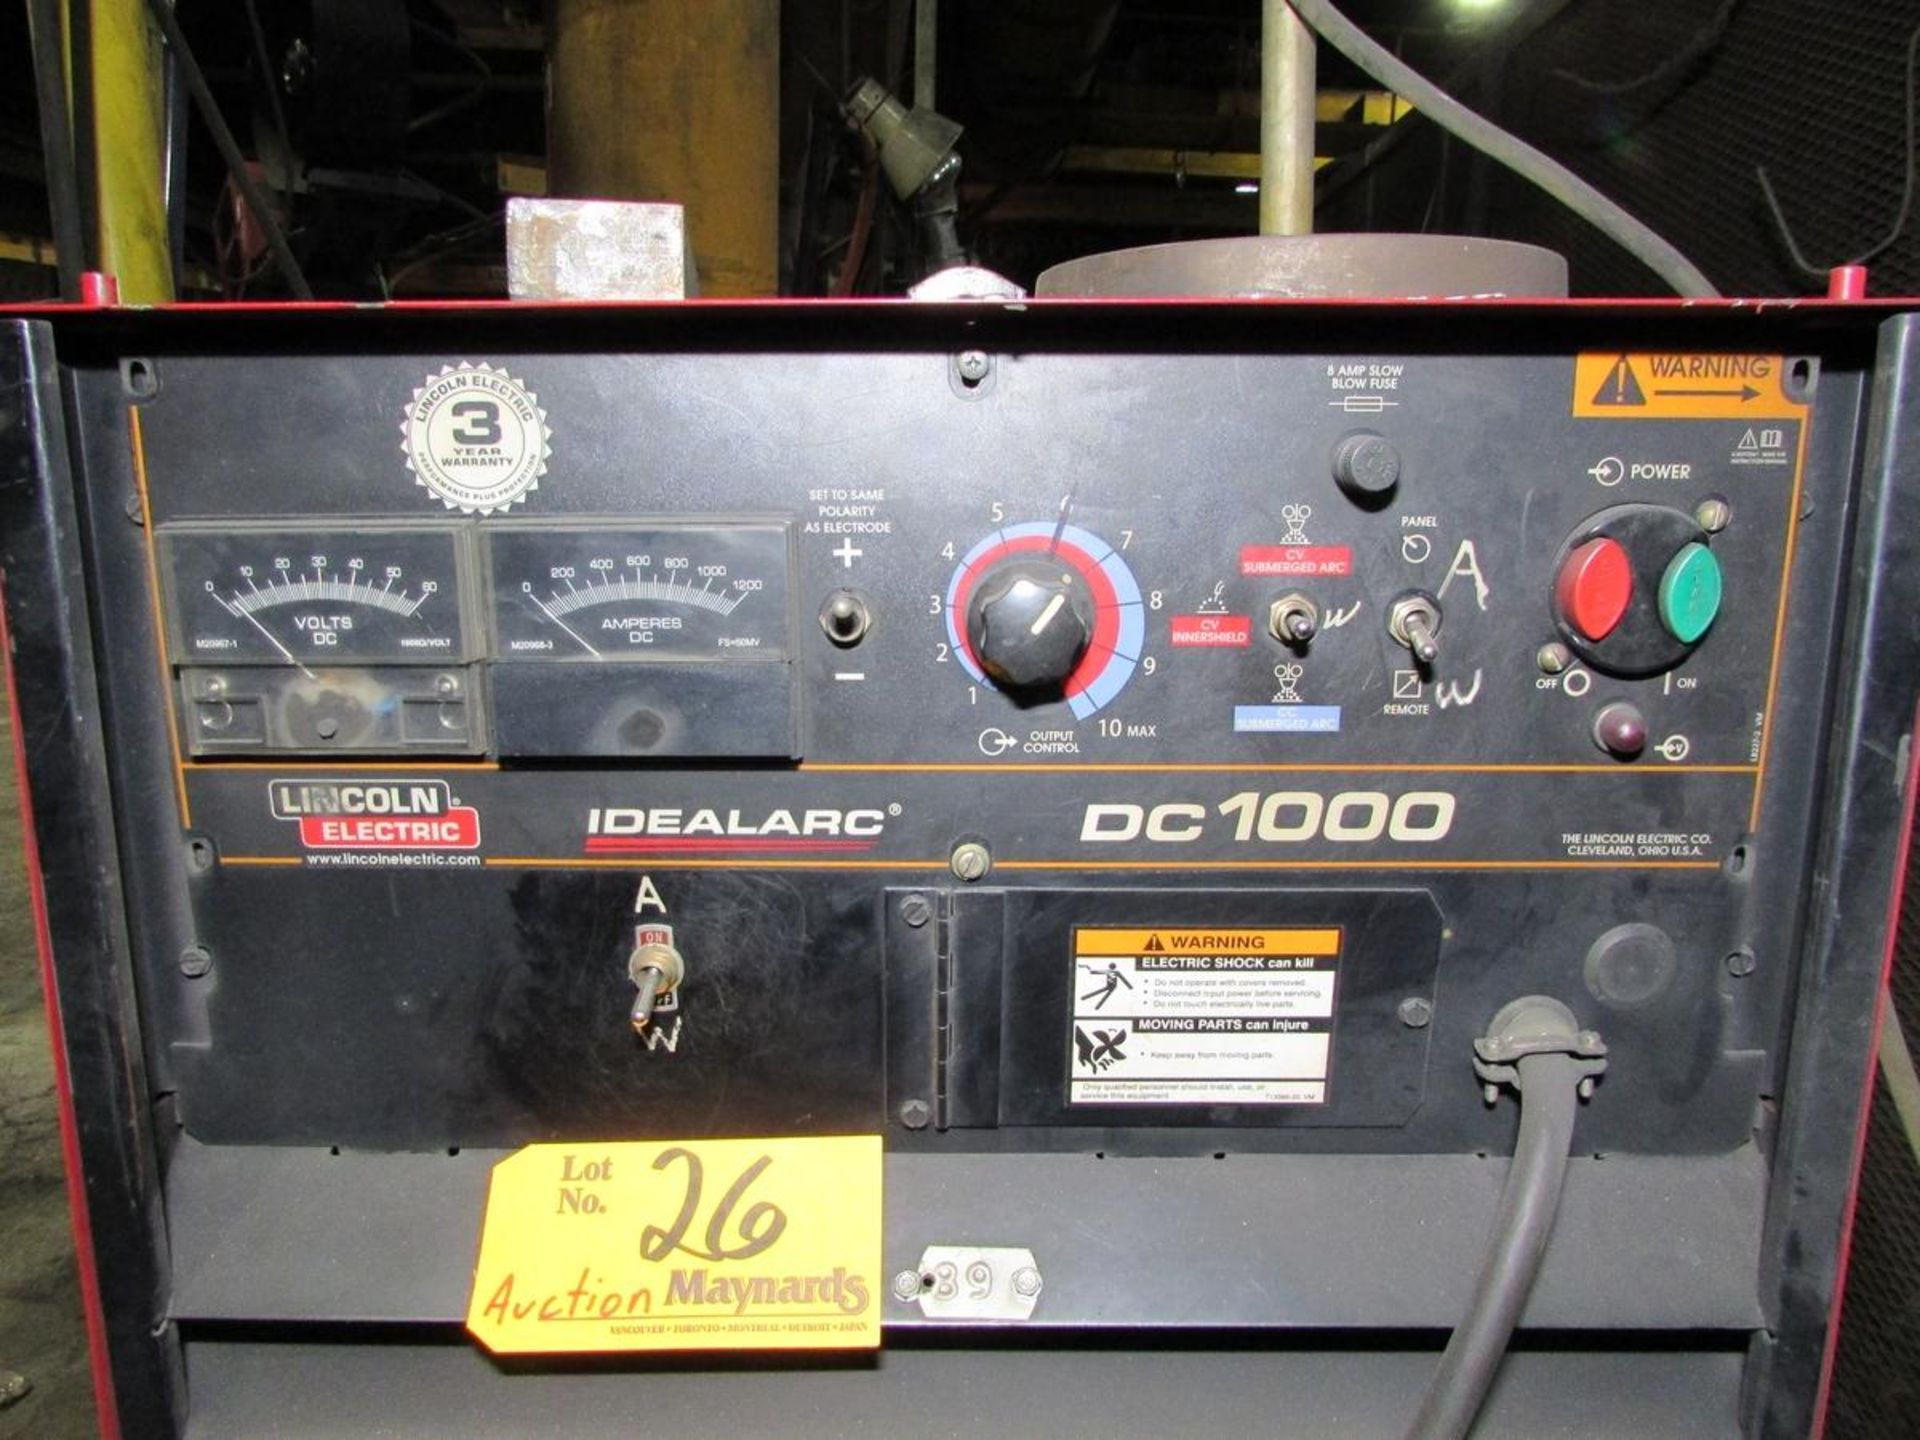 Lincoln Electric Idealarc DC1000 Welding Power Source w/ Welding Boom - Image 4 of 11